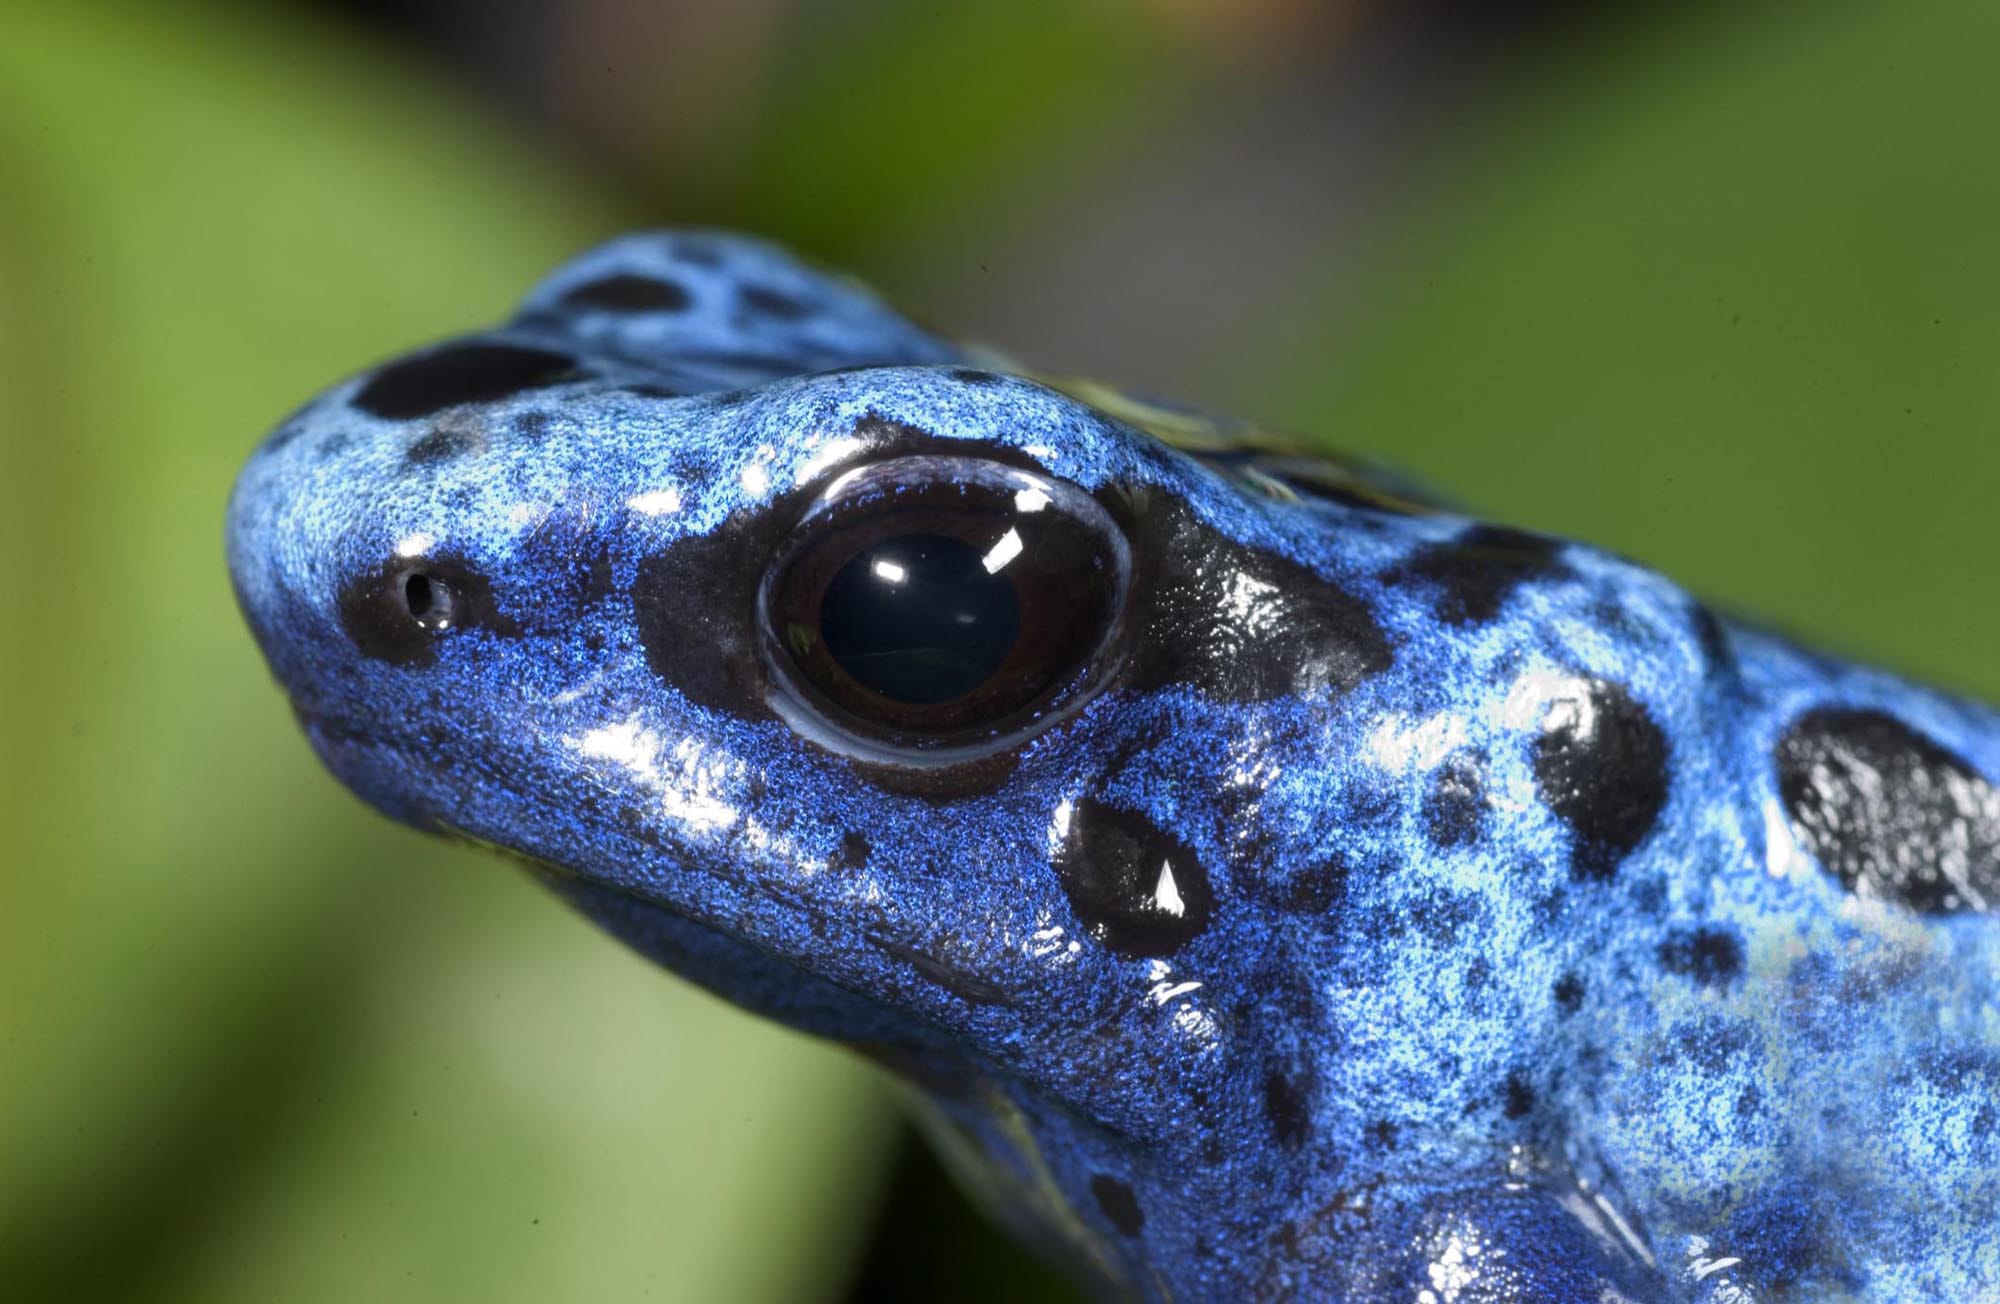 Oregon Zoo
Blue poison dart frogs are great dads, staying with the eggs to protect from insects or dehydration.